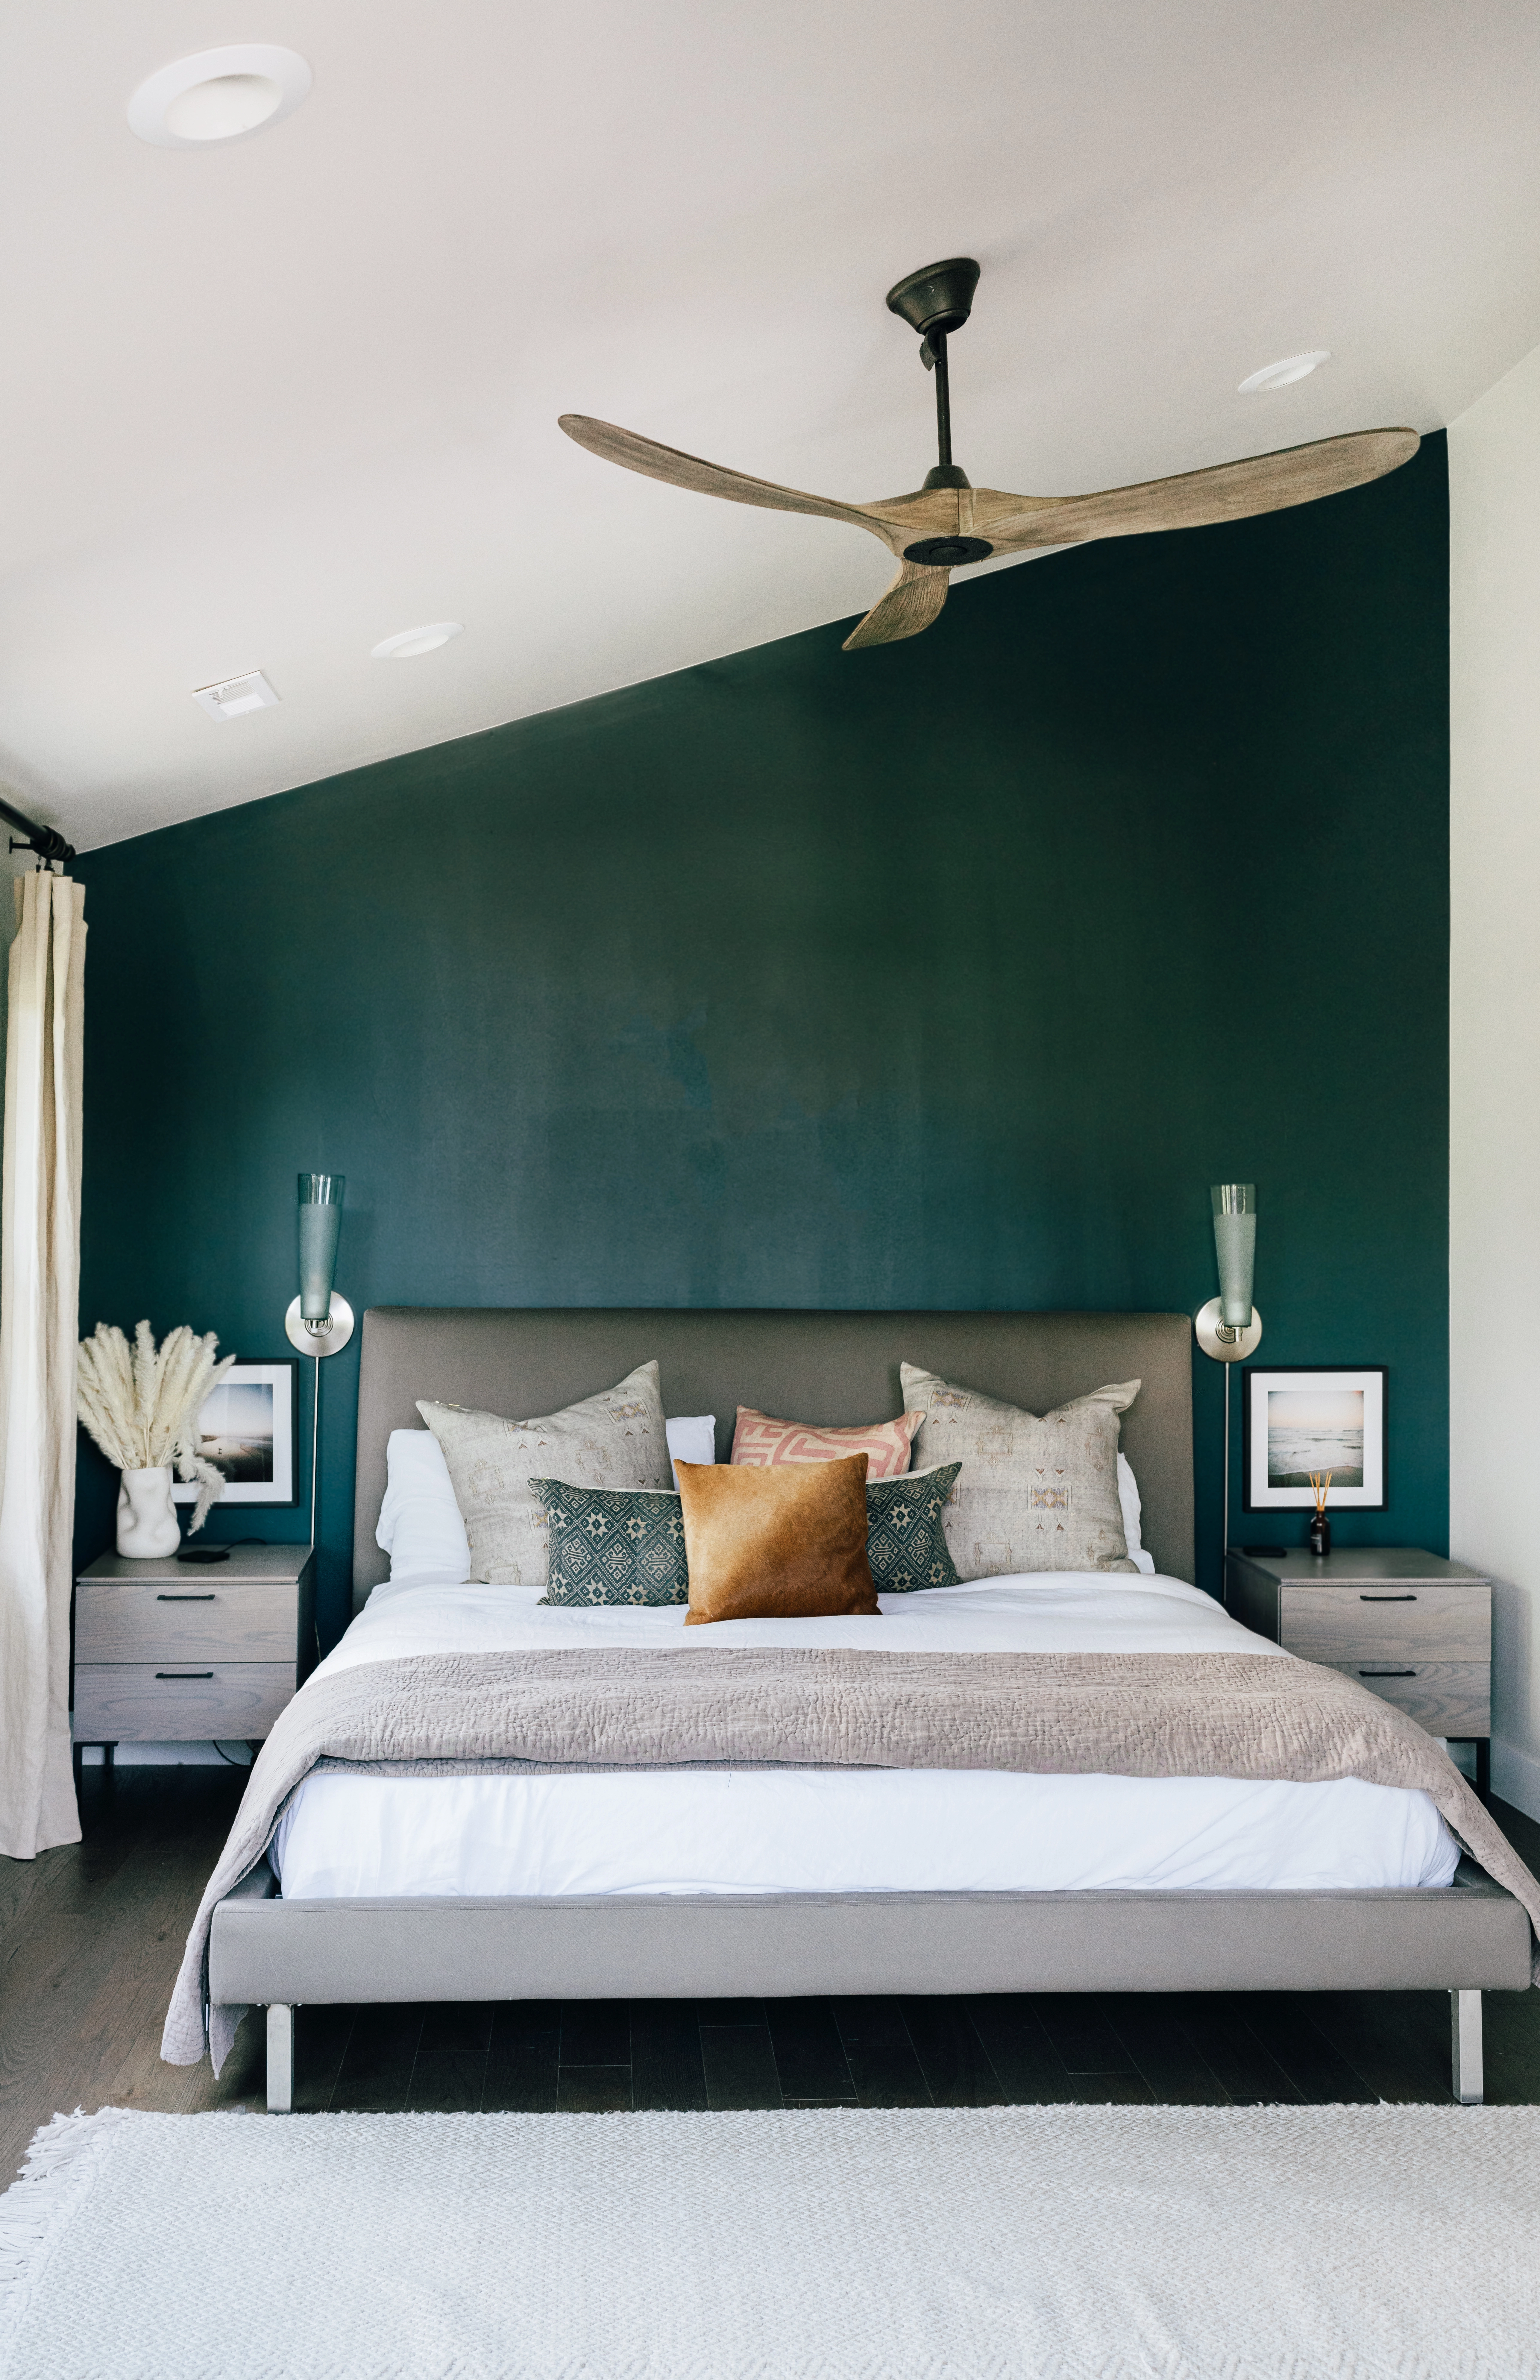 Bohemian style slanted bedroom ceiling with white walls, a forest green accent wall, and gray decor.